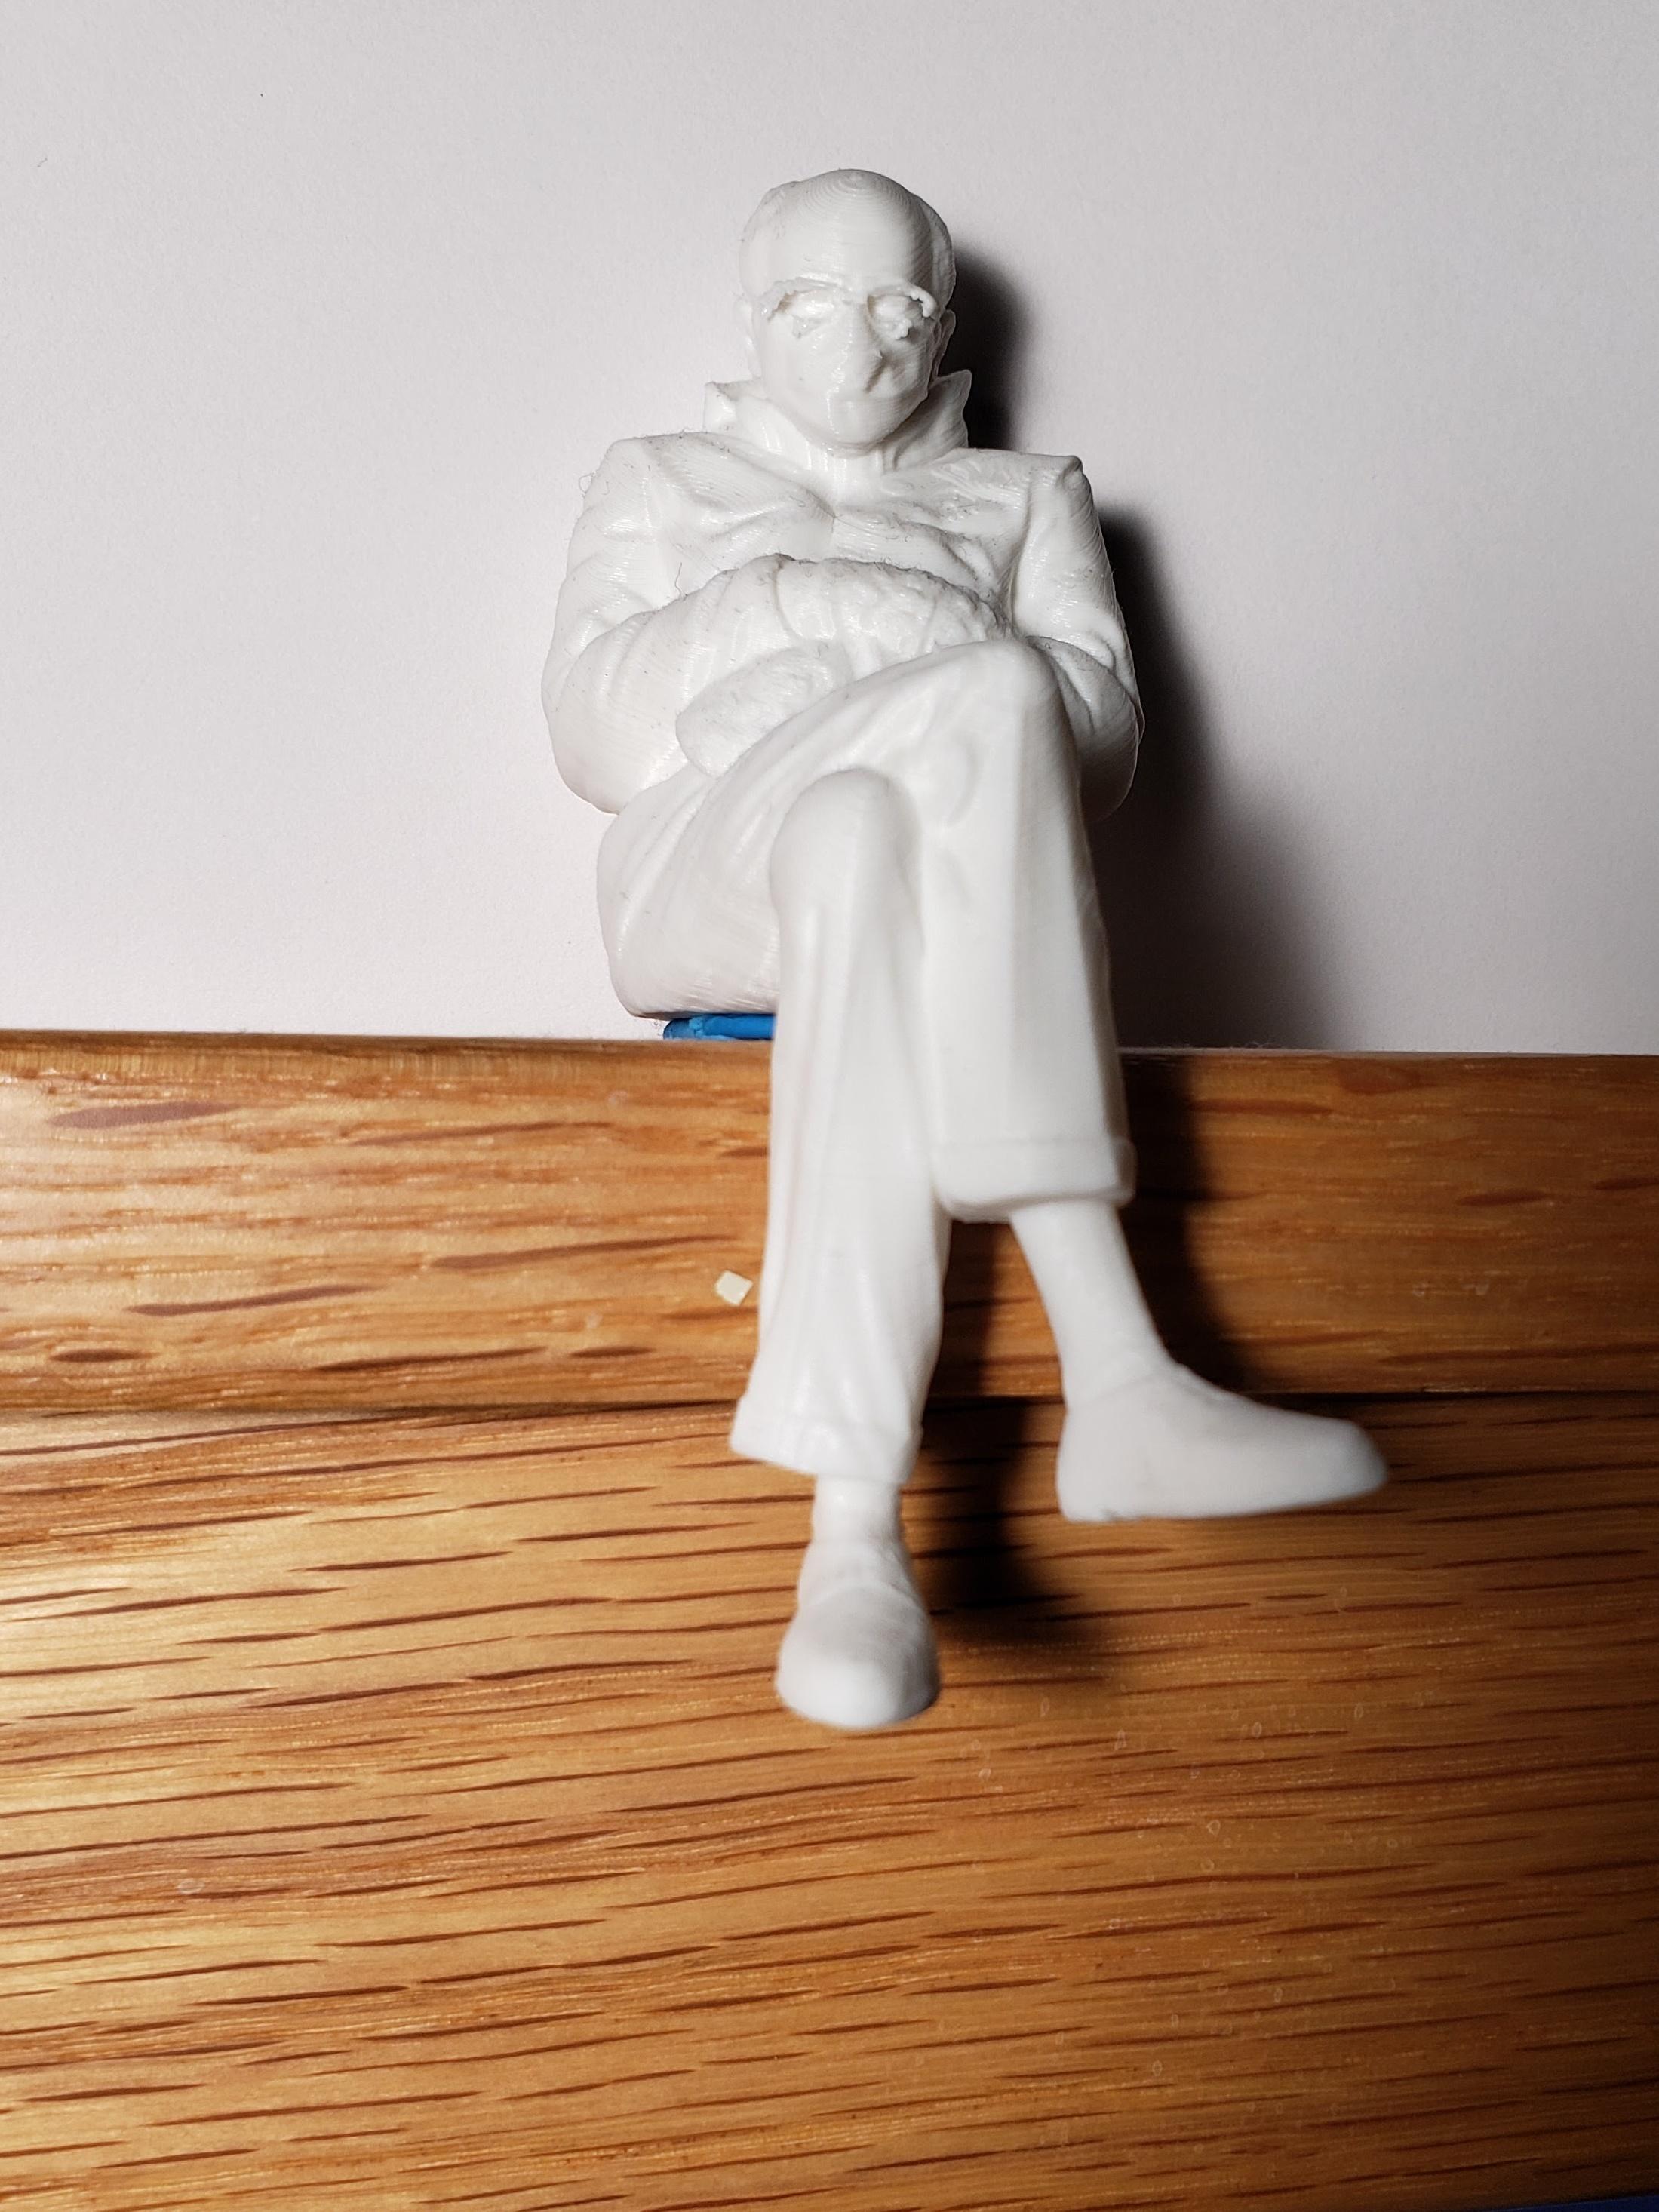 Bundled Up Bernie - Printed at 75% scale in late January 2021. Has been a faithful companion blue-tacked to my desk for the last few months. - 3d model